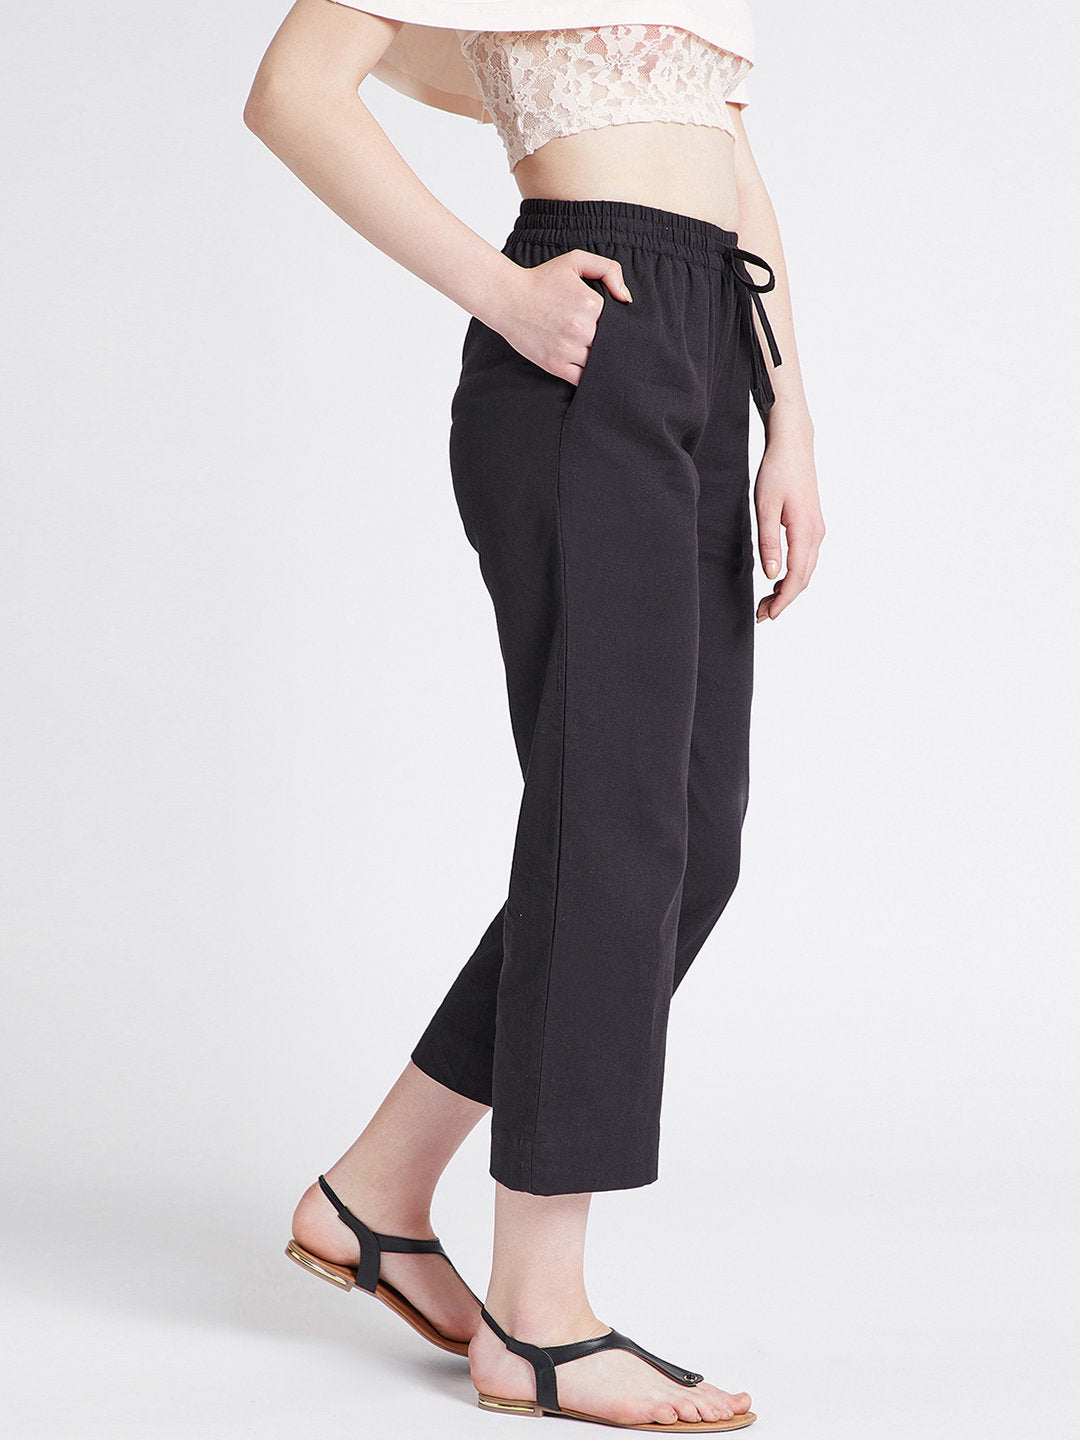 Black cotton straight pants with pockets